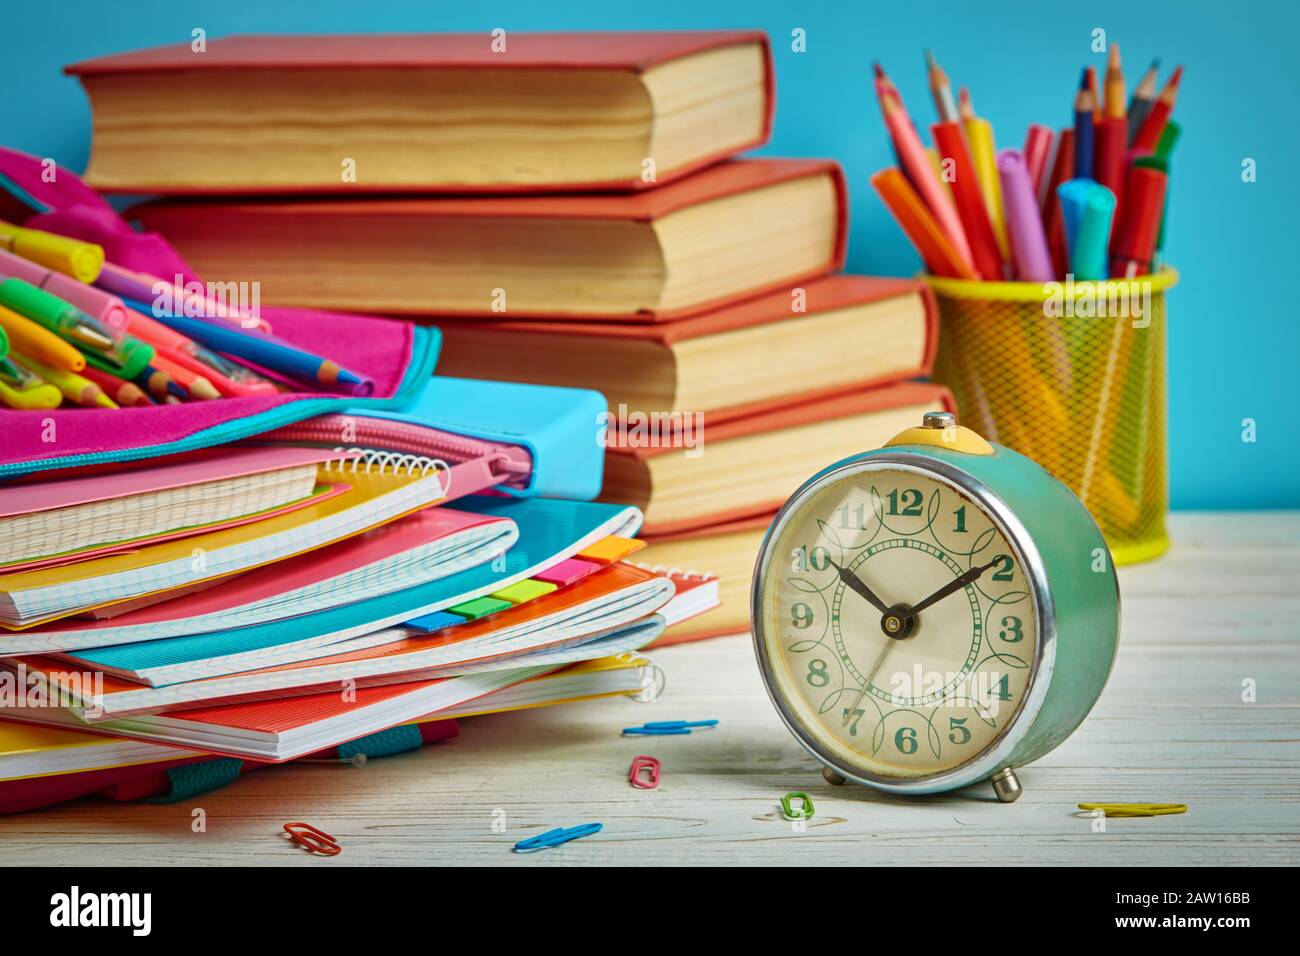 The composition is laid out from a color school stationery Stock Photo